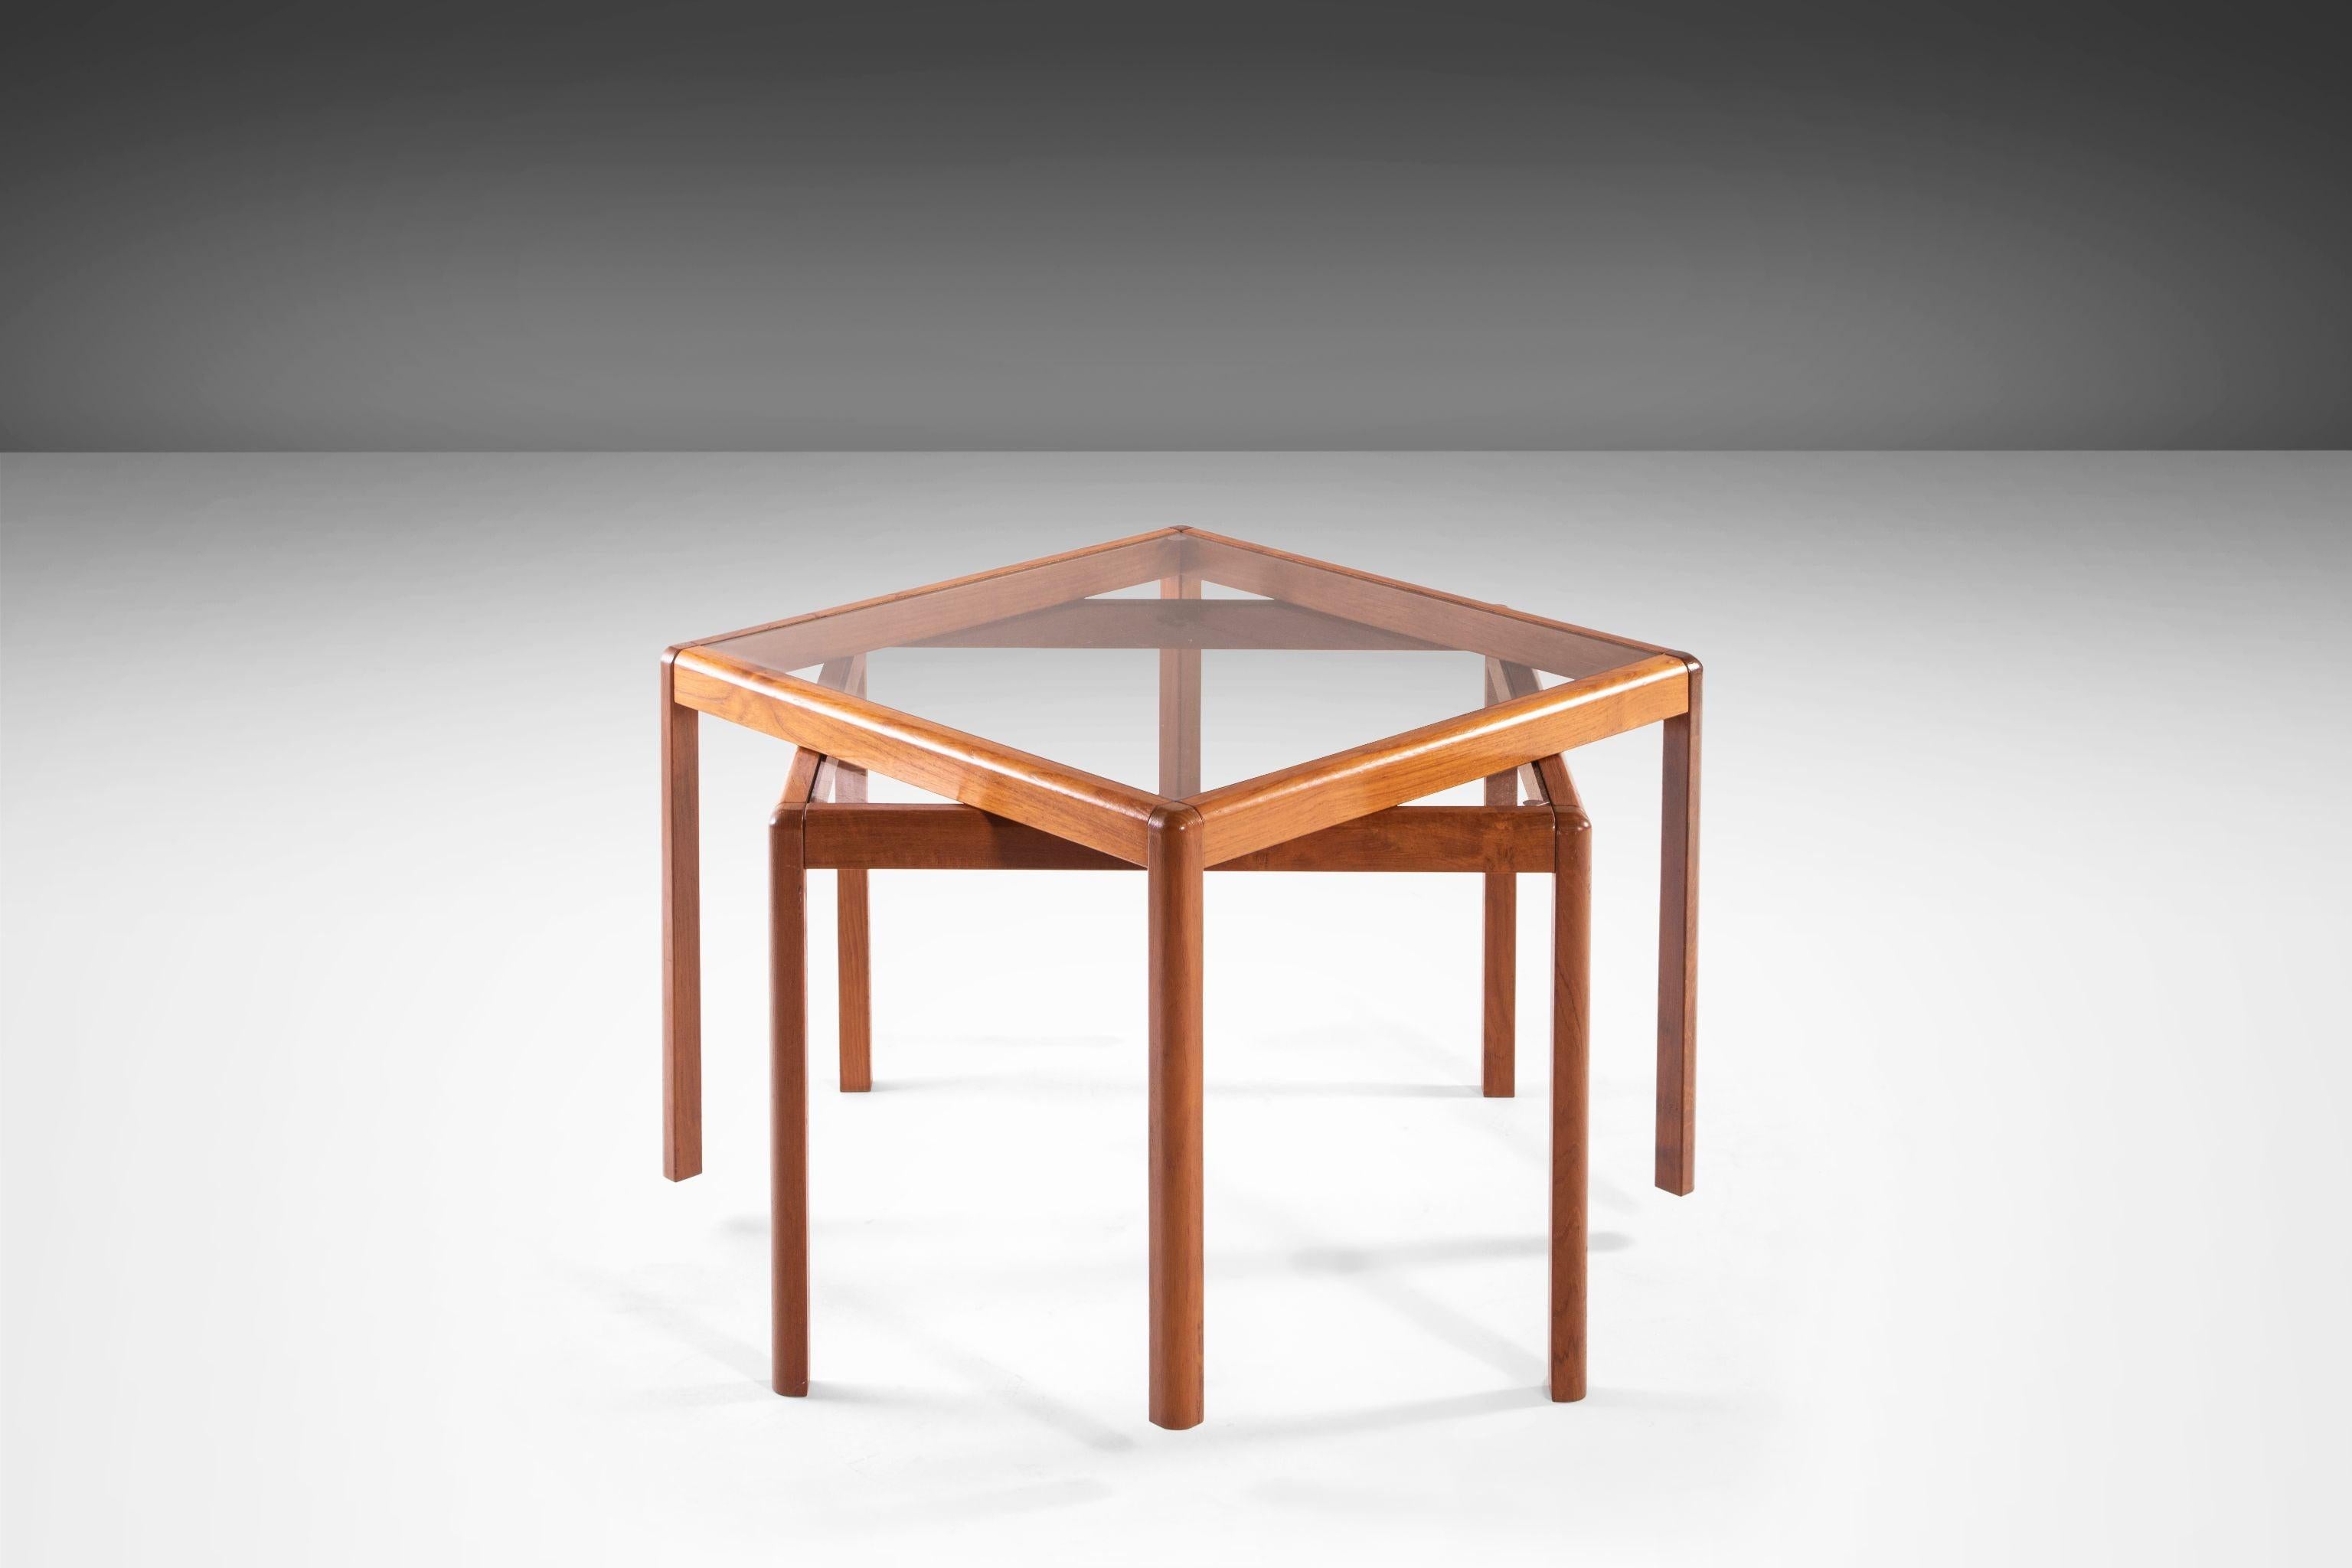 Minimalist Danish Modern Teak End Tables with Smoked Glass Tops, c. 1970's 2